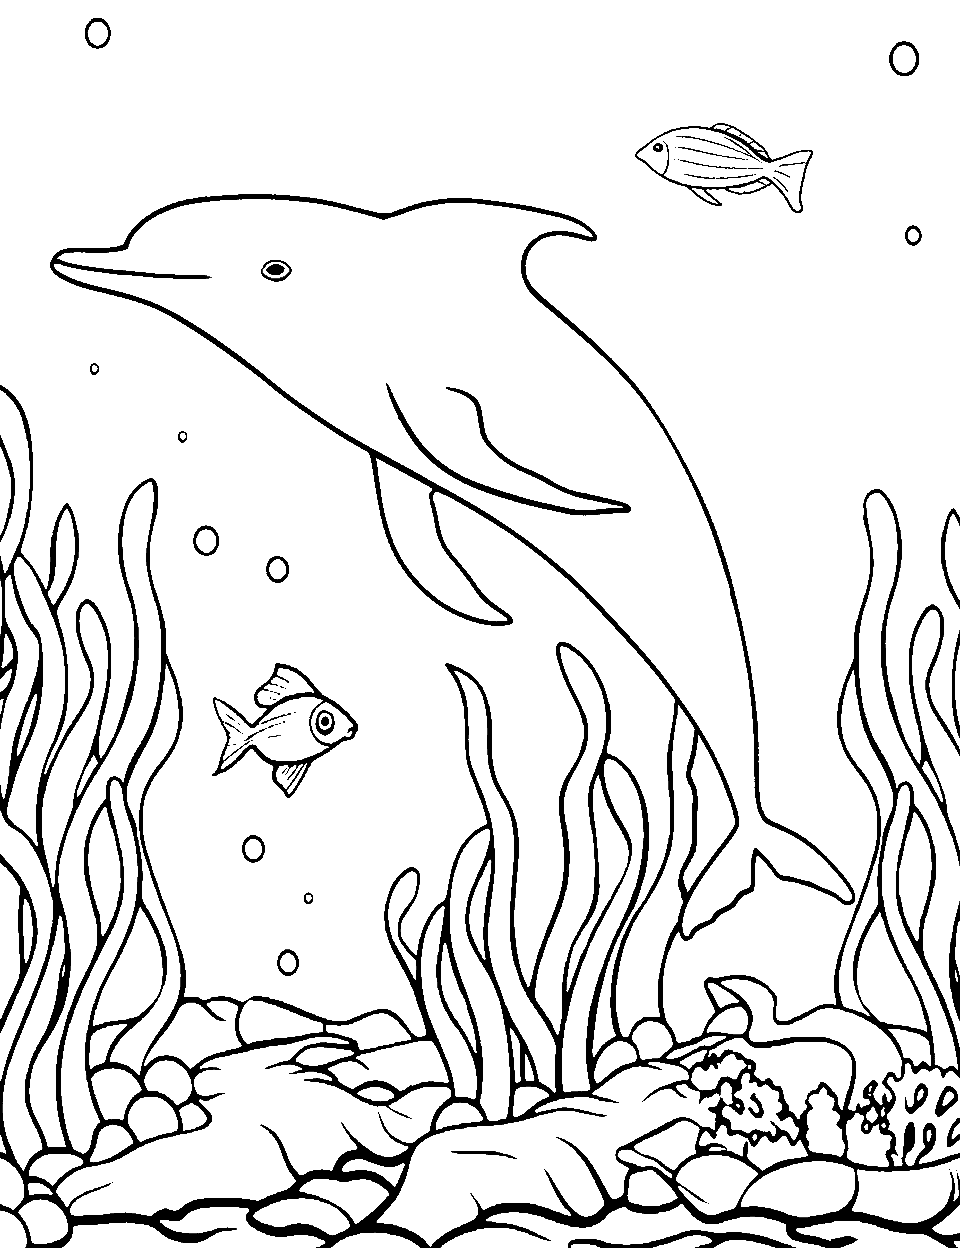 Dolphin Among Sea Weeds Coloring Page - A dolphin gently swimming amidst tall seaweeds on the ocean floor.